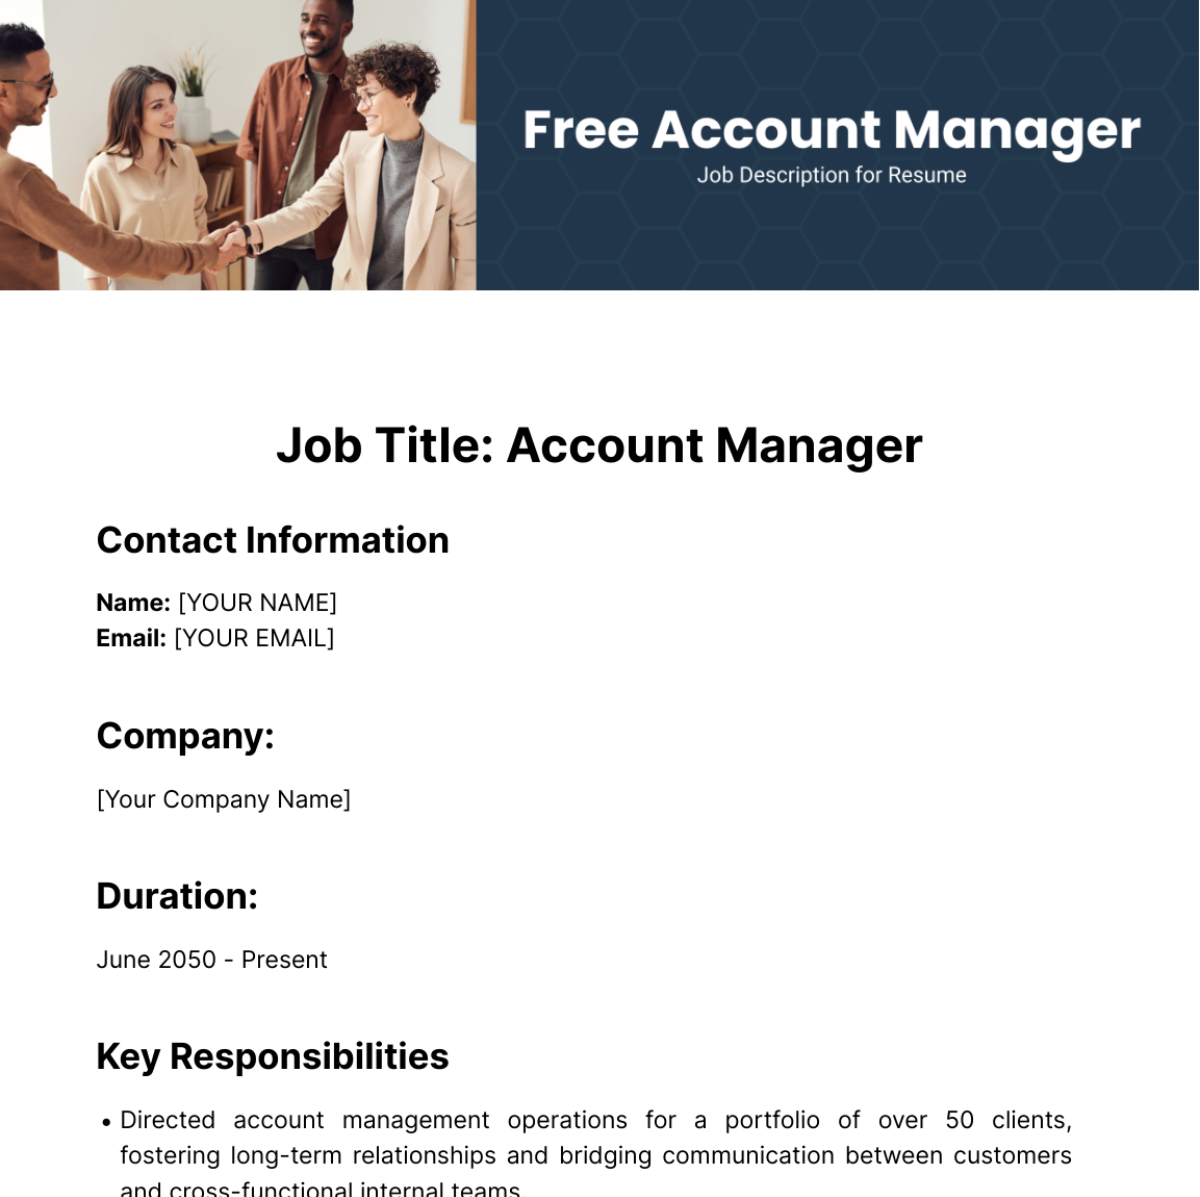 Account Manager Job Description for Resume Template